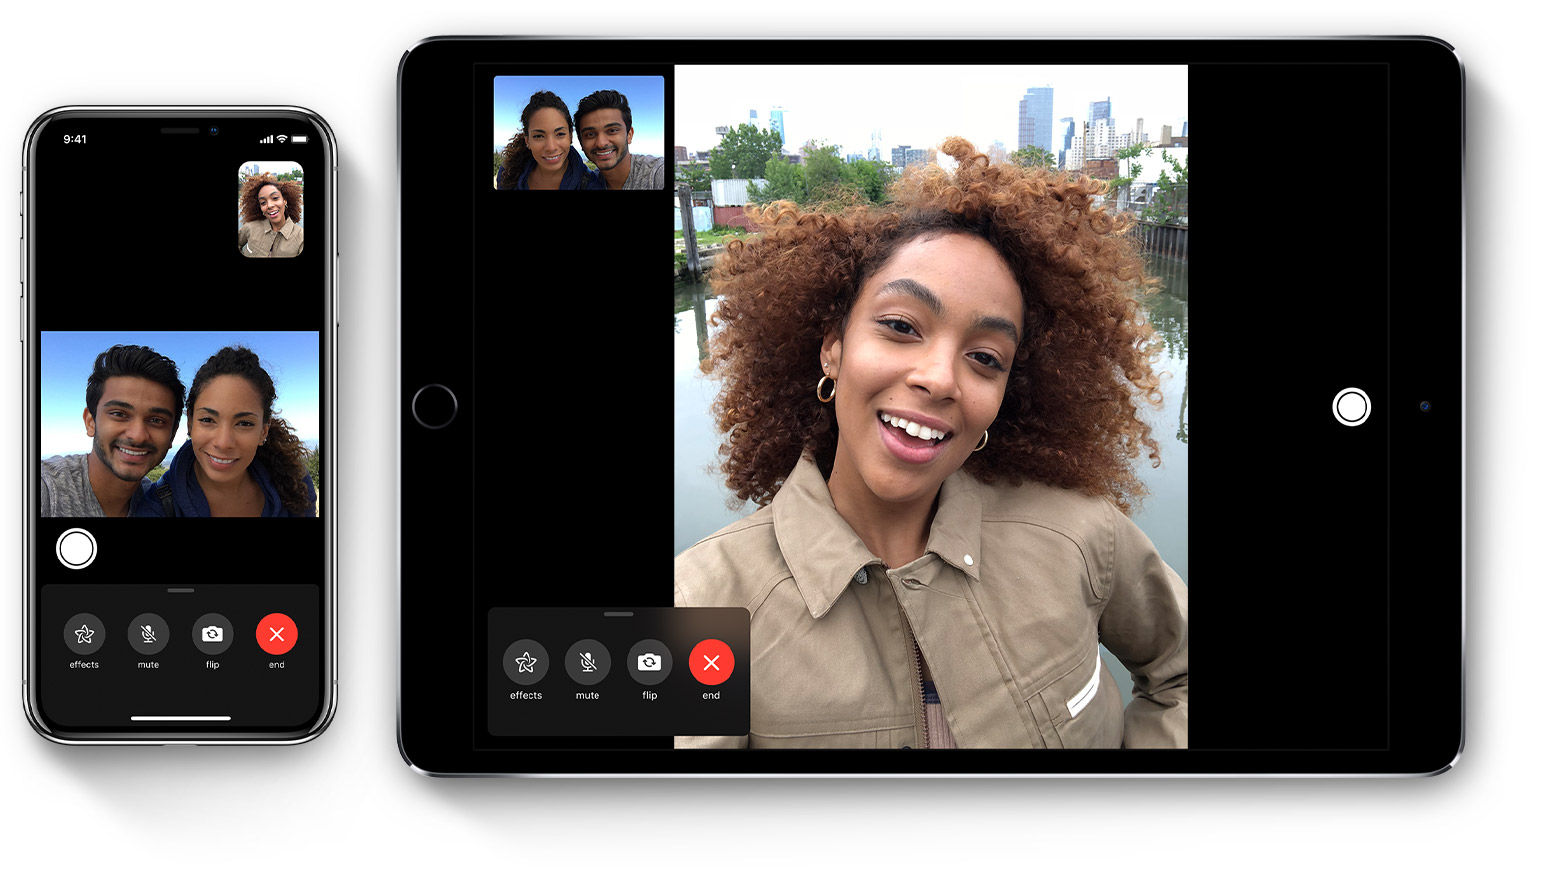 [Jan 31 update: Apple sued] Group Facetime (ft) not working after calling bug/exploit comes to light